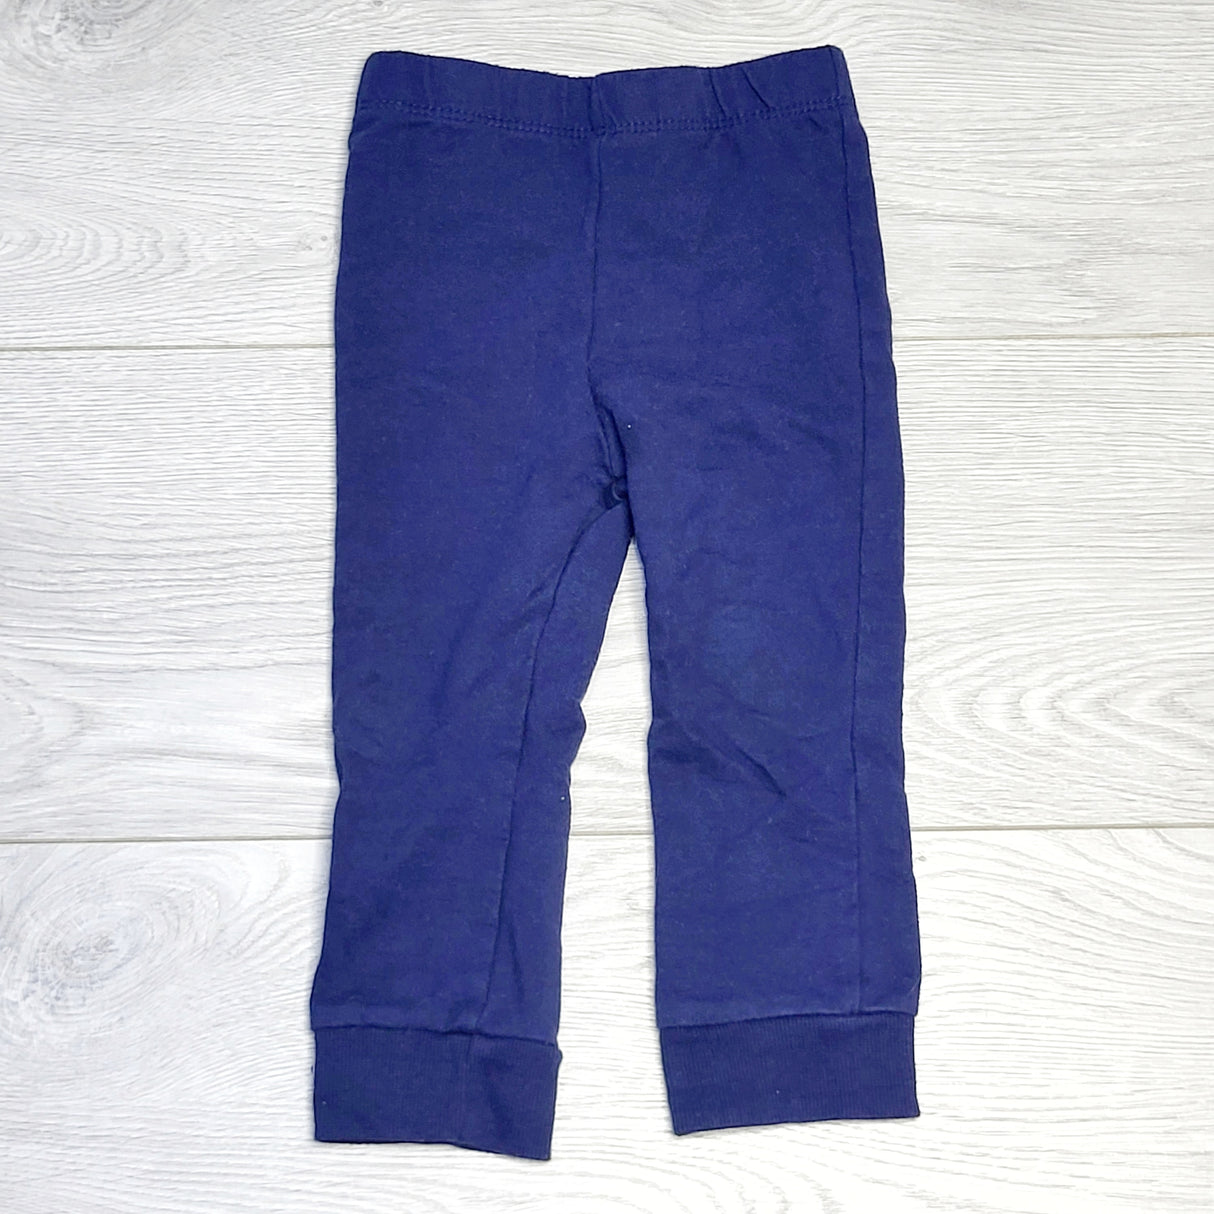 CHOL3 - Baby Mode navy cotton pants, size 12 months